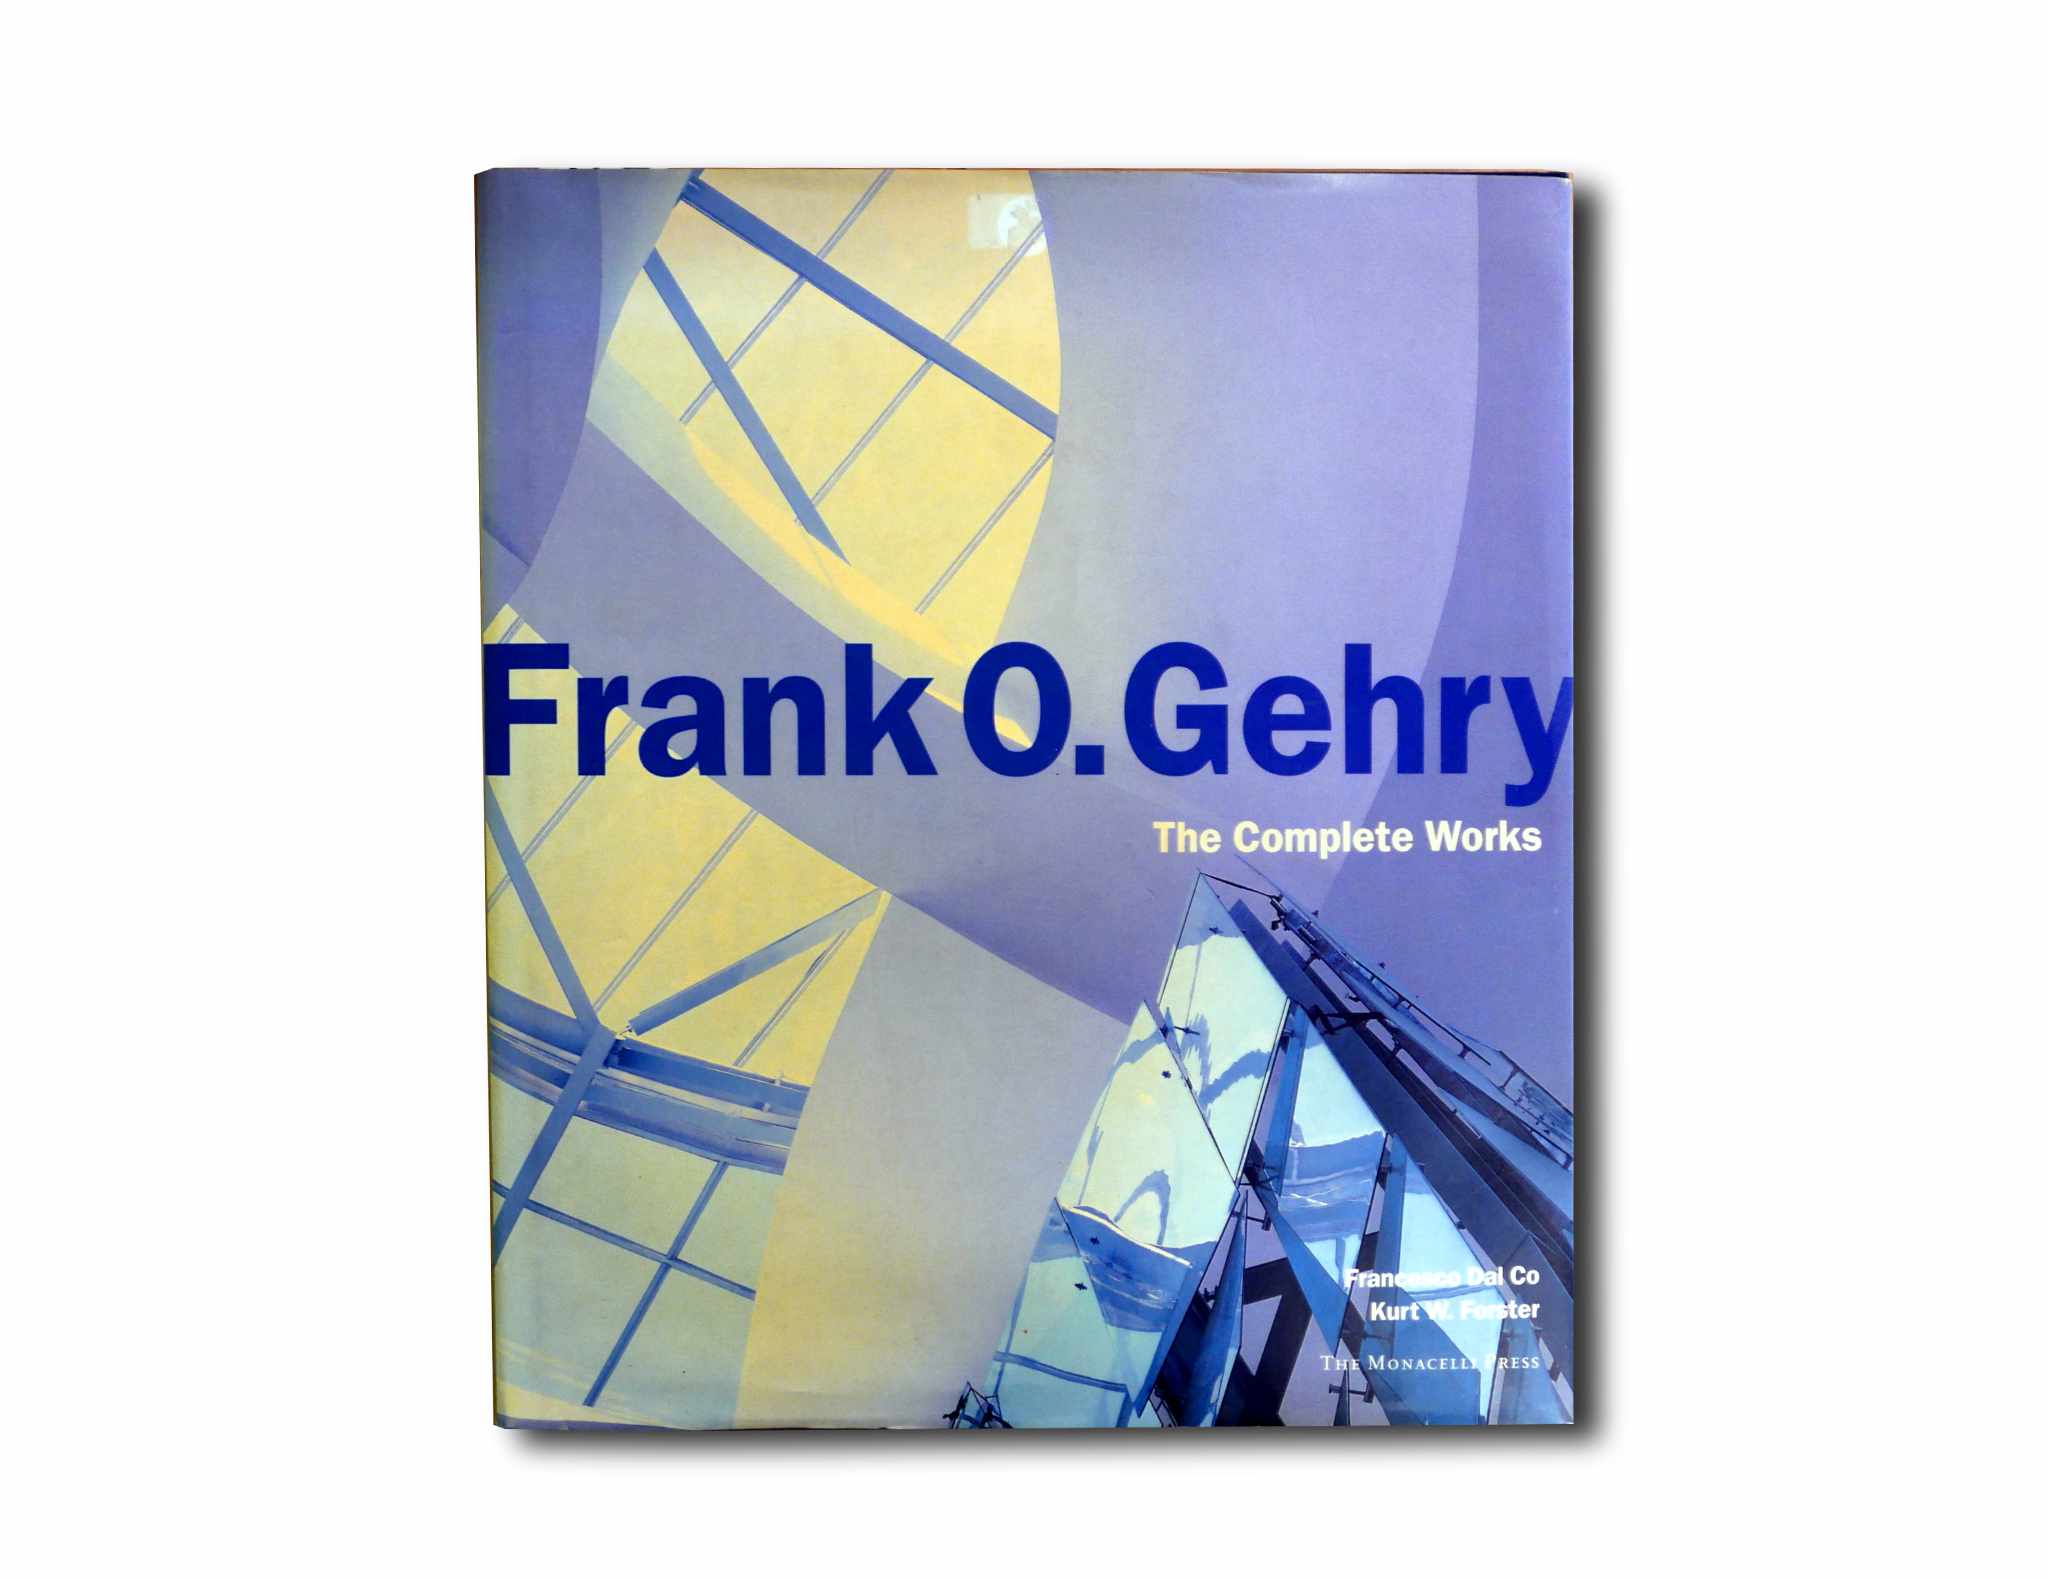 Image showing the book Frank O. Gehry: The Complete Works